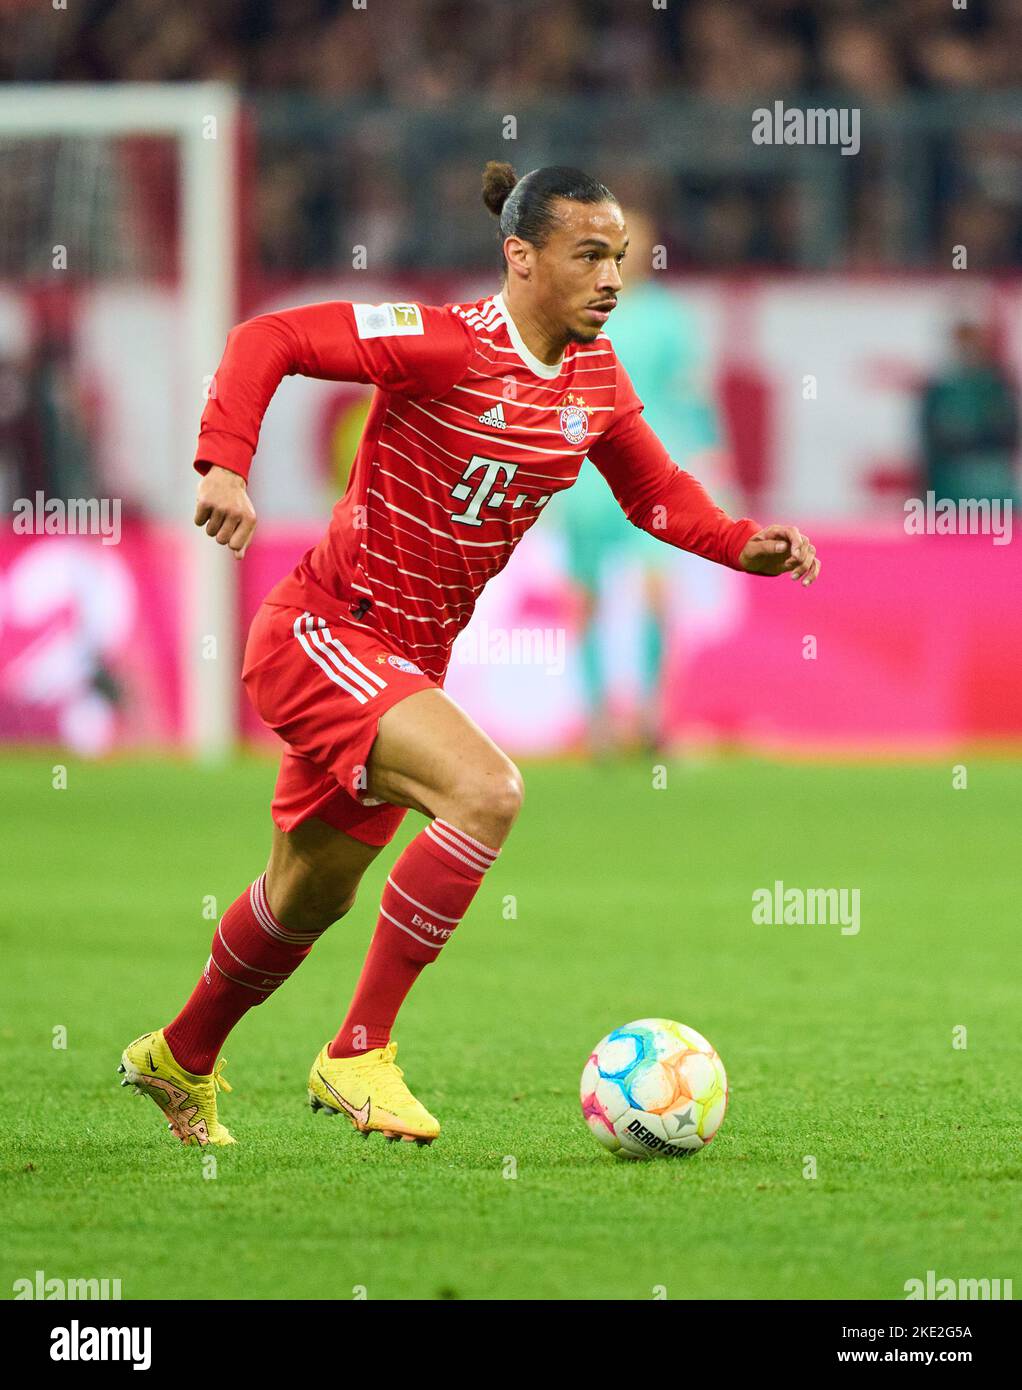 Leroy SANE, FCB 10  in the match FC BAYERN MÜNCHEN - SV WERDER BREMEN 6-1 1.German Football League on Nov 8, 2022 in Munich, Germany. Season 2022/2023, matchday 14, 1.Bundesliga, FCB, München, 14.Spieltag © Peter Schatz / Alamy Live News    - DFL REGULATIONS PROHIBIT ANY USE OF PHOTOGRAPHS as IMAGE SEQUENCES and/or QUASI-VIDEO - Stock Photo